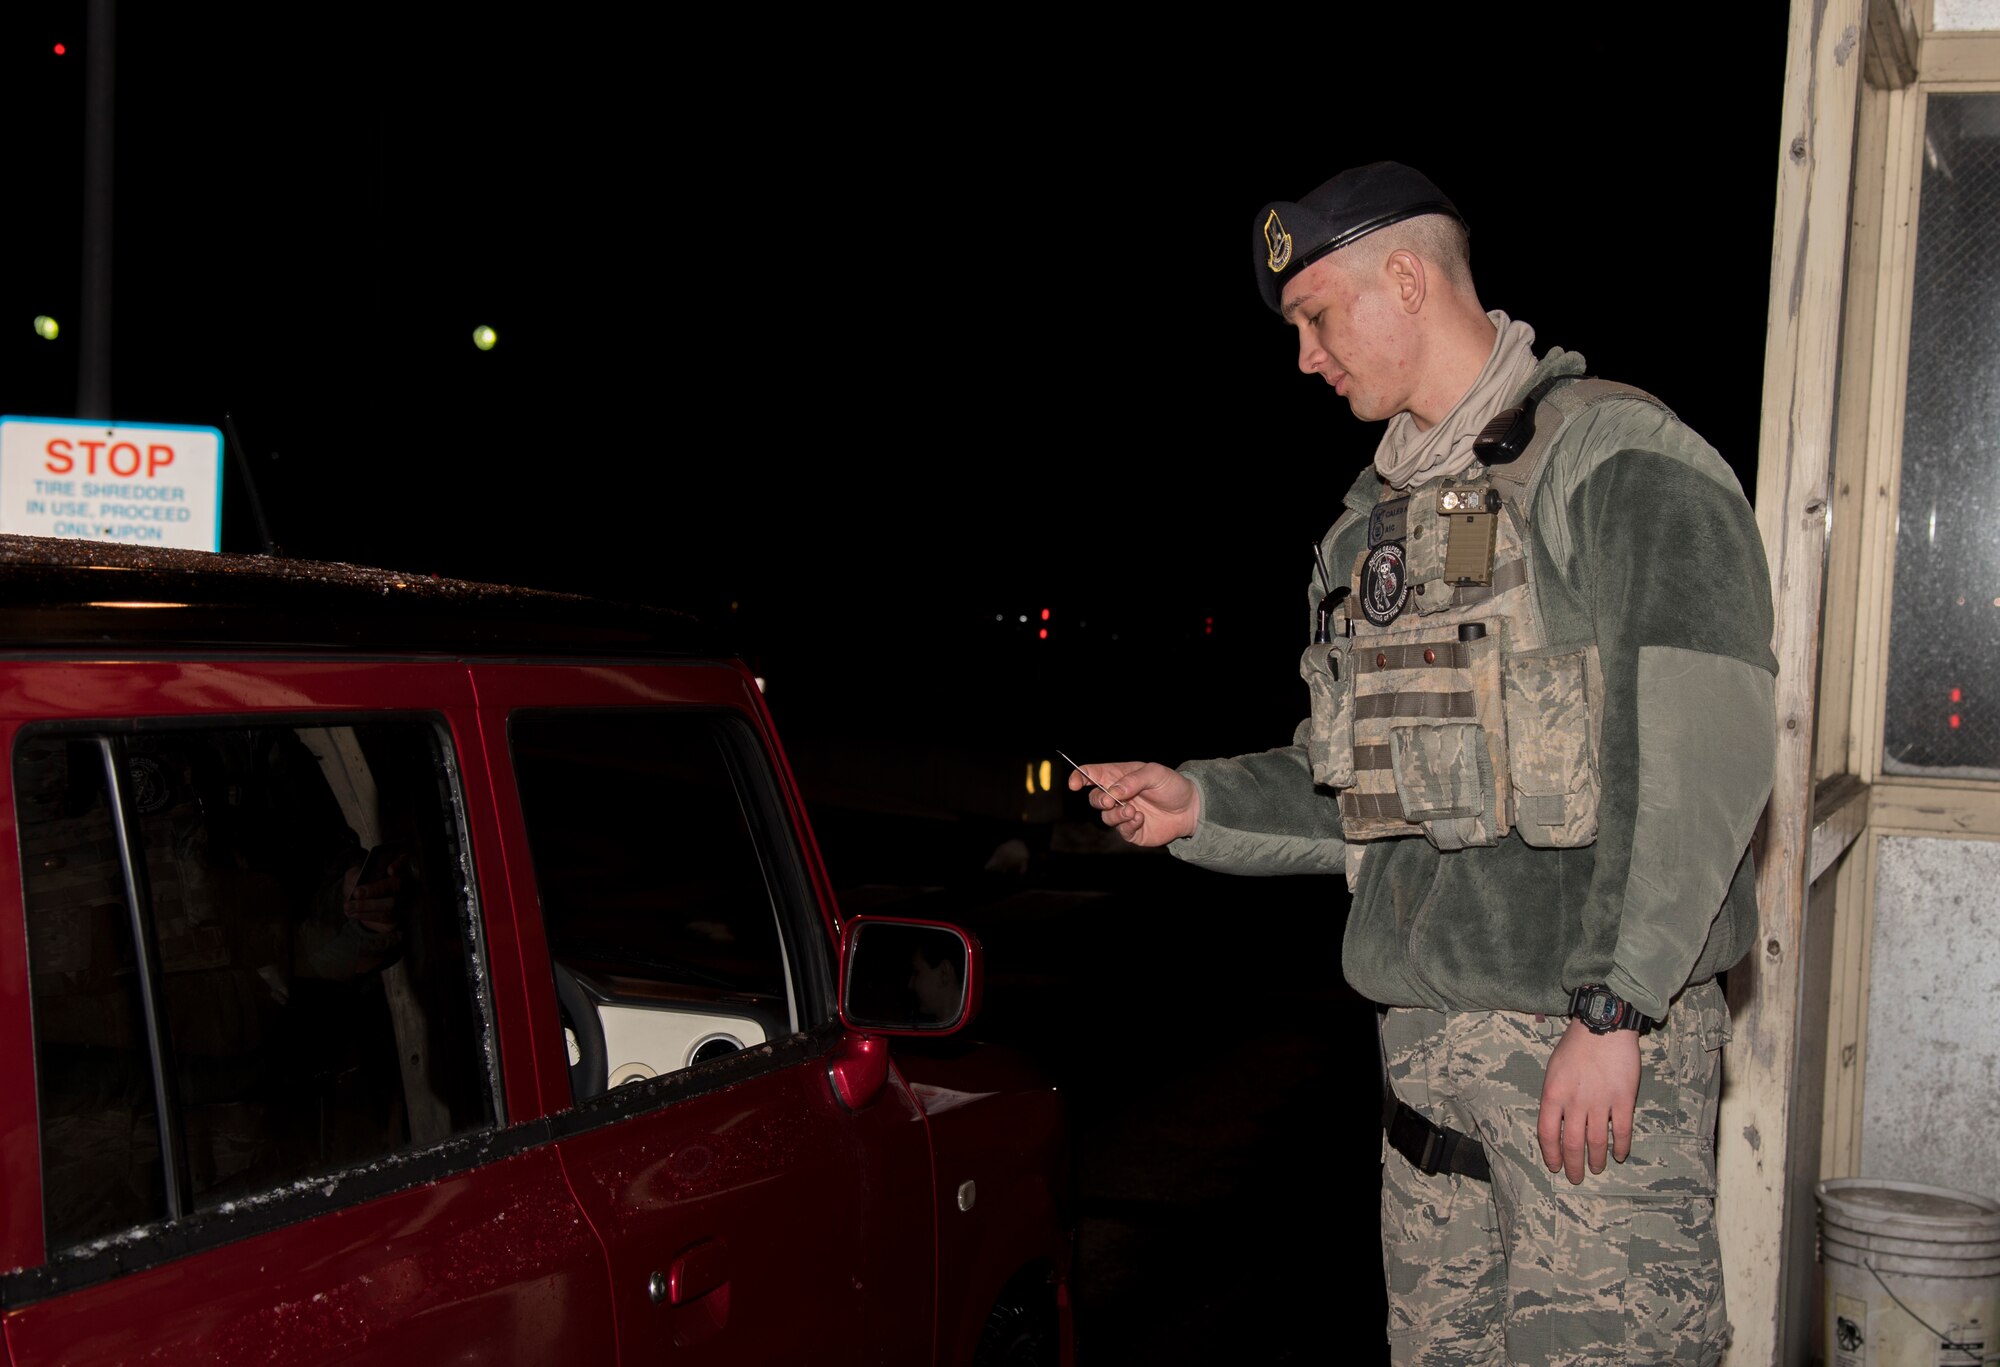 U.S. Air Force Airman 1st Class Caleb Kenley, a security response team member and installation entry controller with the 35th Security Forces Squadron, checks an identification card at Misawa Air Base, Japan, March 1, 2016. Kenley's daily mission is to safeguard personnel and property, as well as to provide security to the protection level resources on Misawa AB. (U.S. Air Force photo by Senior Airman Brittany A. Chase)